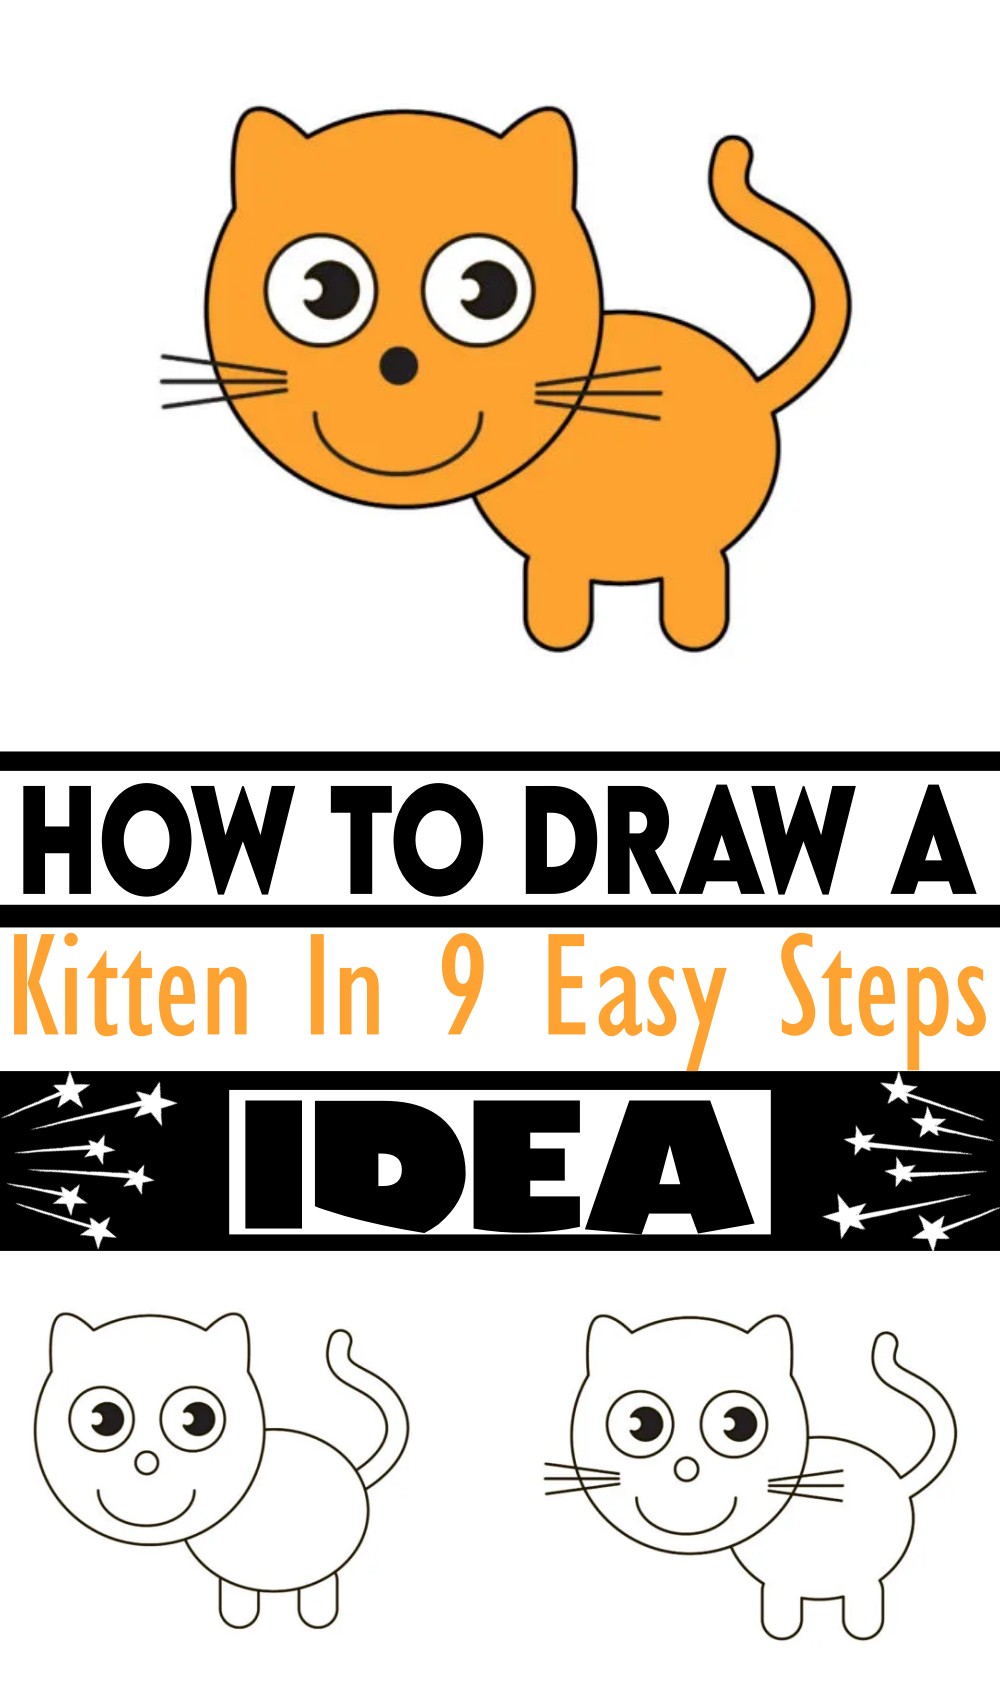 How To Draw A Kitten In 9 Easy Steps